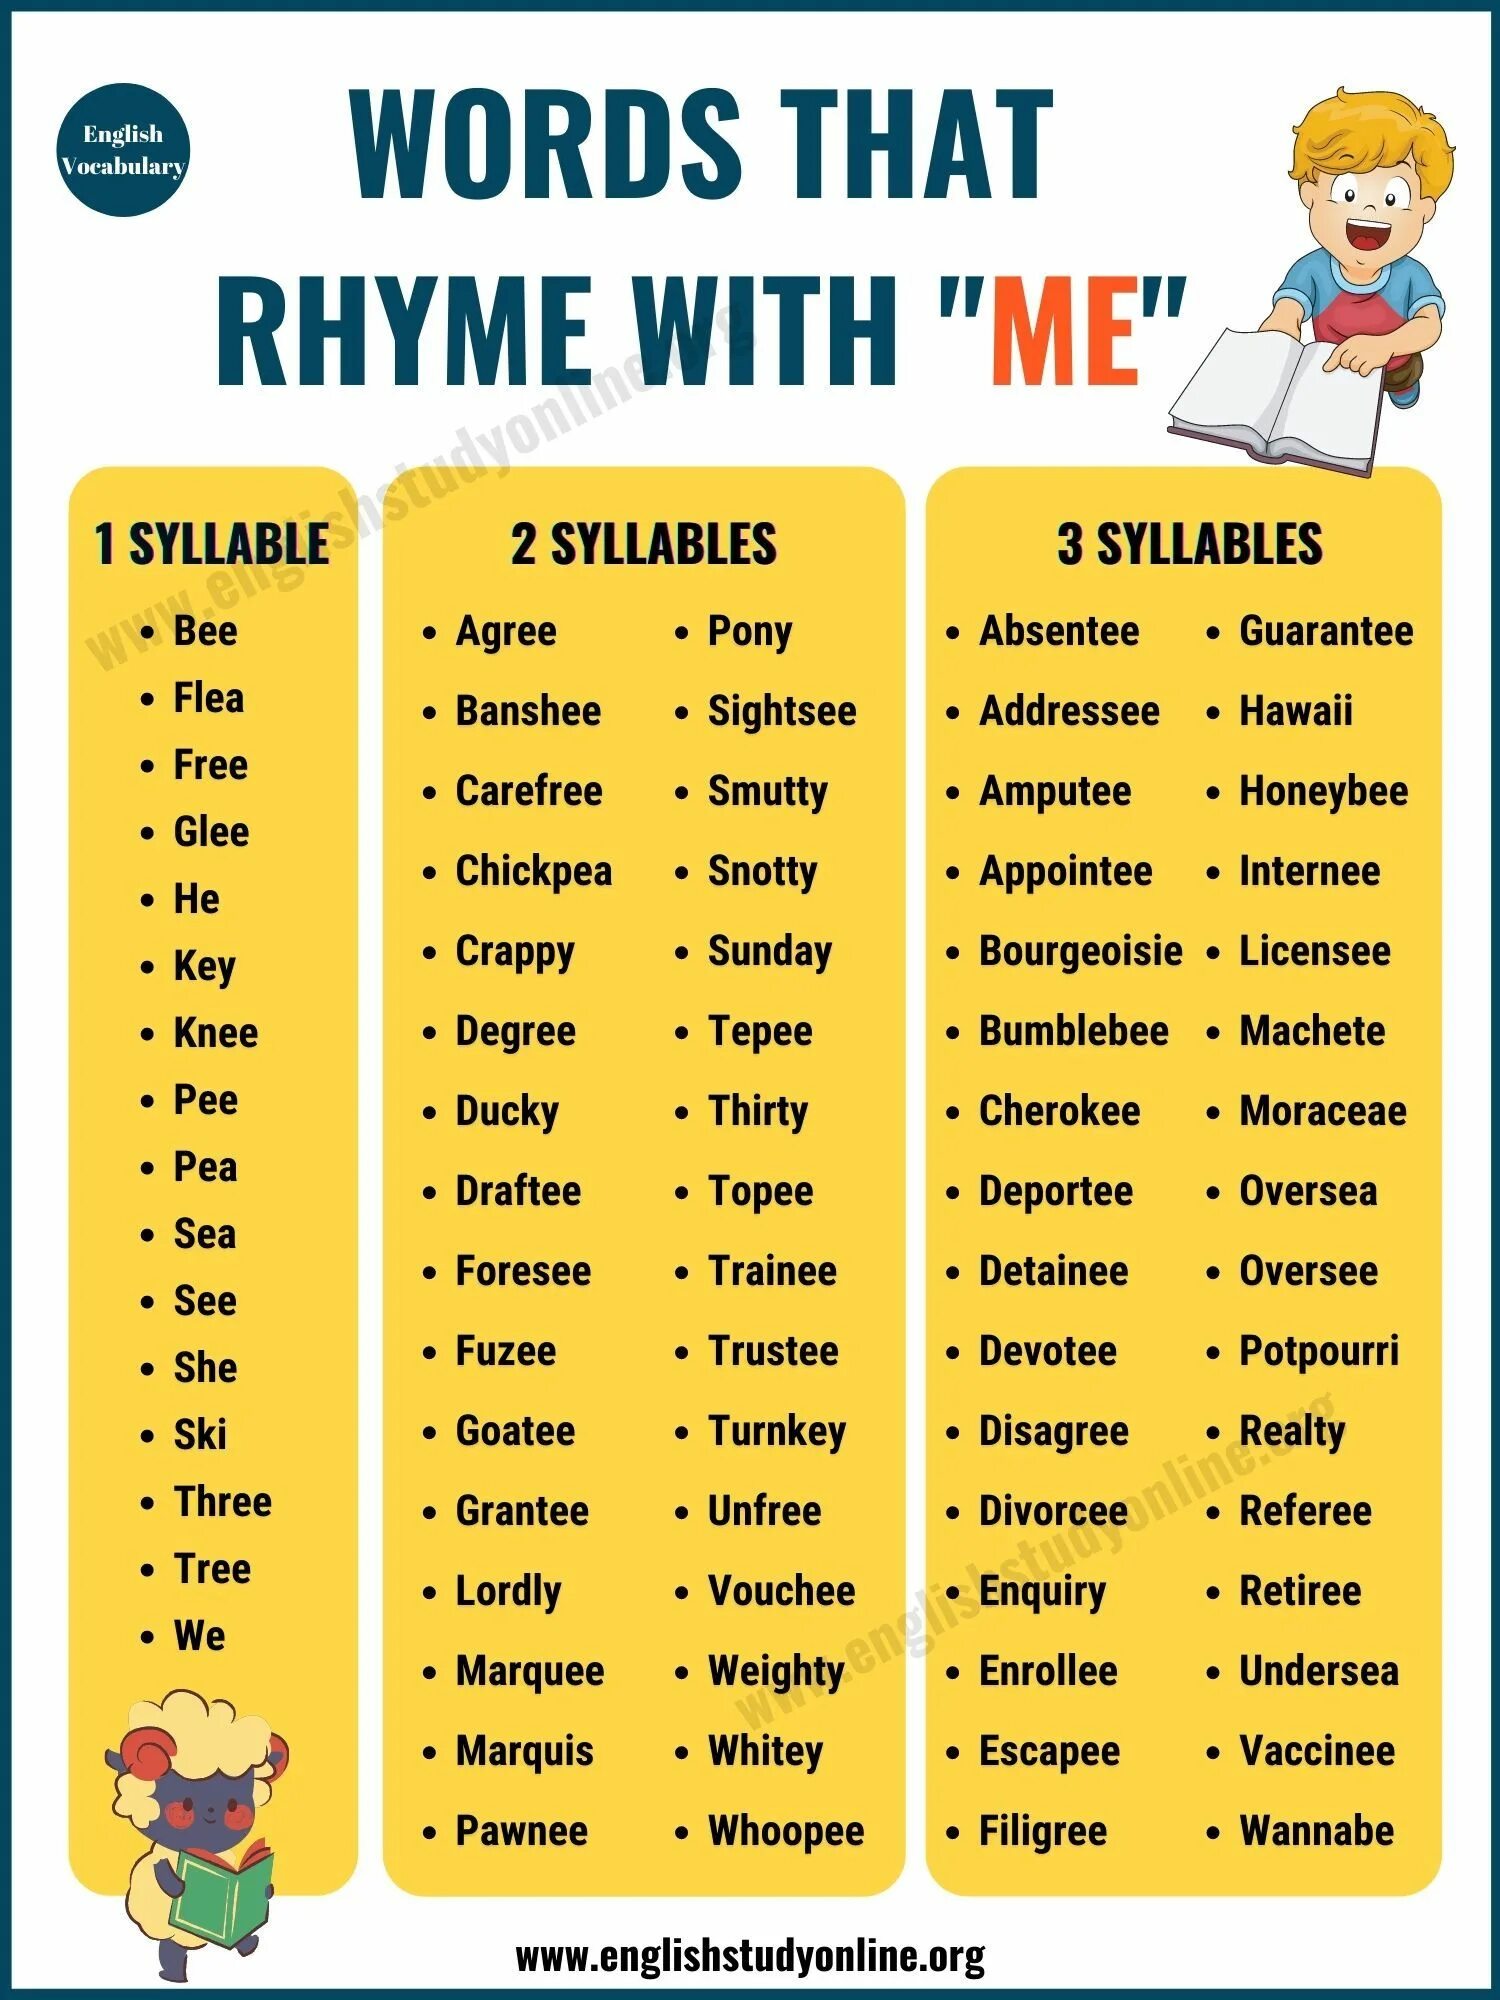 Words that rhyme. Rhyme Words. Rhyming Words in English. Th Words. Words that Rhyme with are.